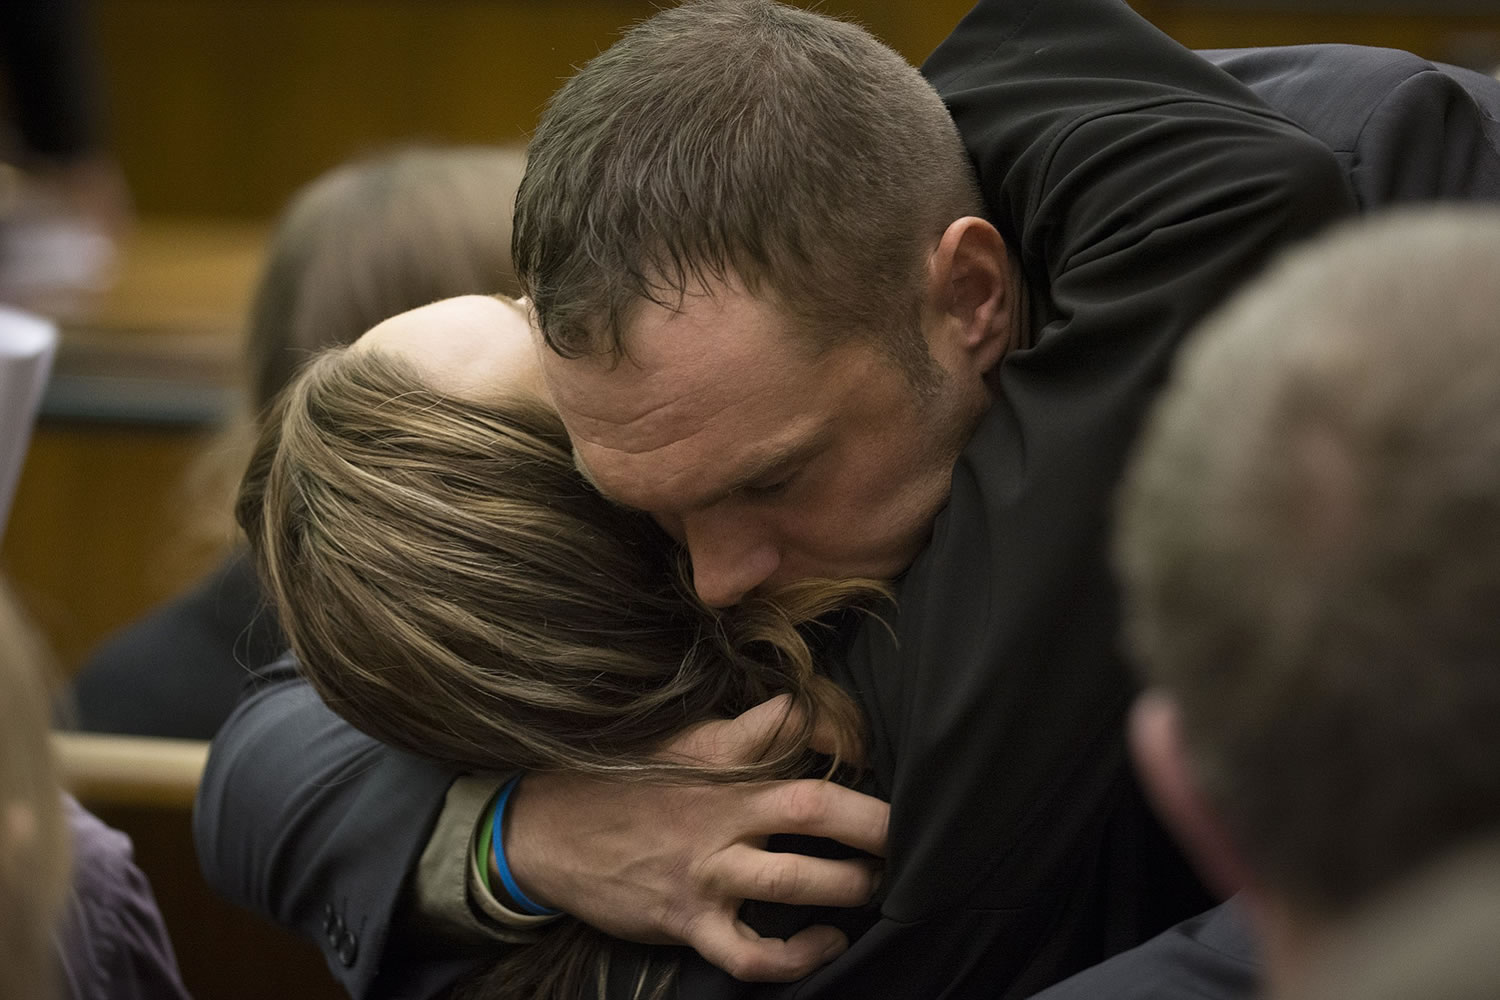 Photos by Ariane Kunze/The Columbian
Darrell Christopher Fry embraces friends and family after pleading guilty to manslaughter Thursday in connection to the shooting death of Matthew Clark in October 2012.